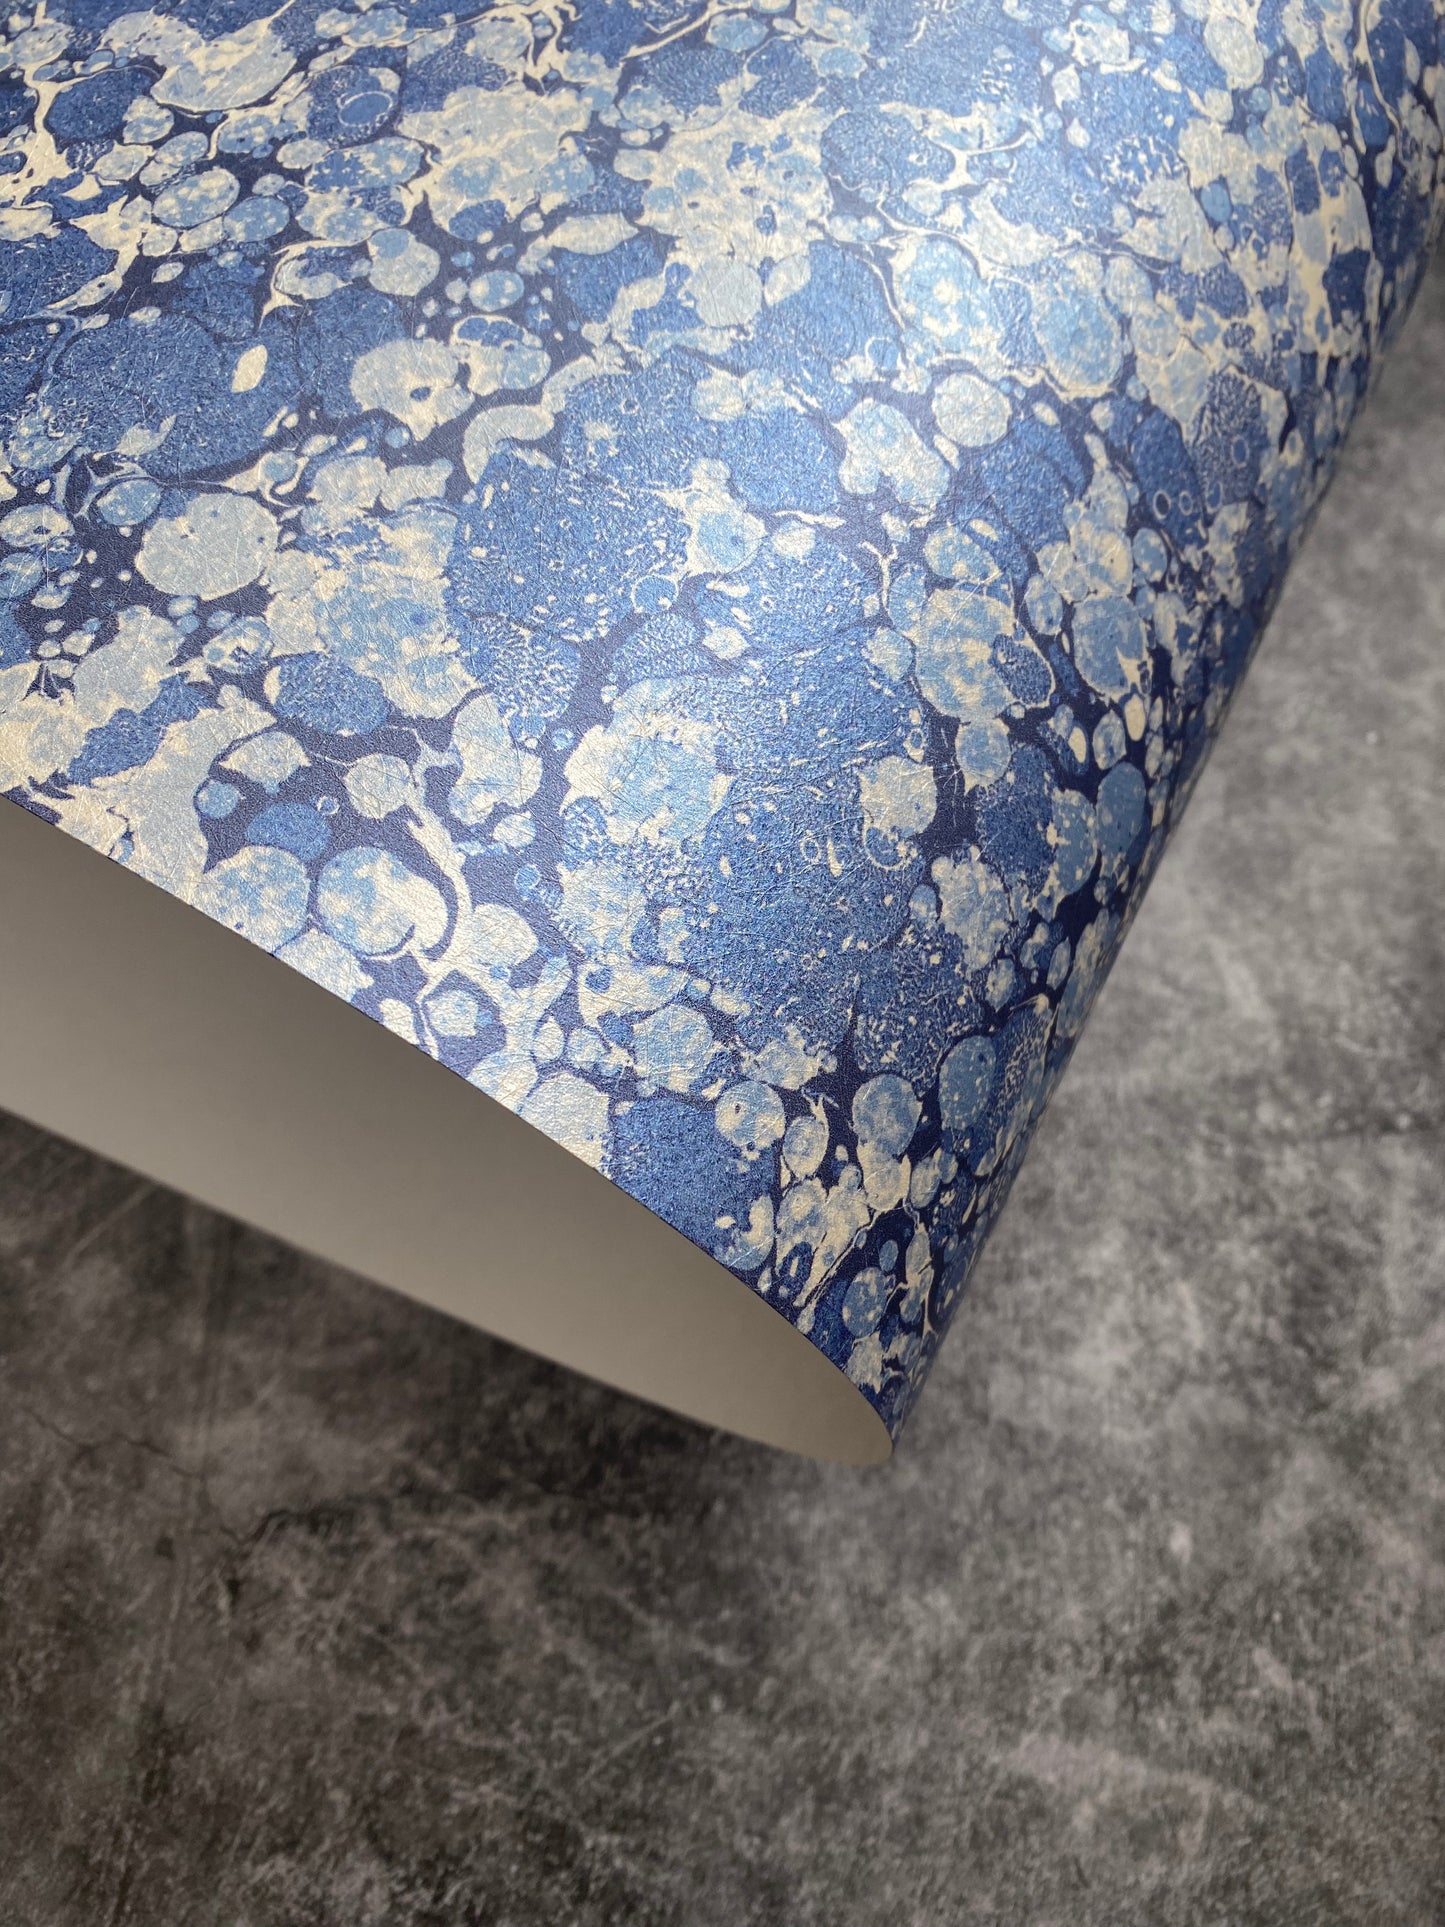 Printed Wallpaper - 'Ditzy' Col: Blue Daze - Mica Coated Non-Woven